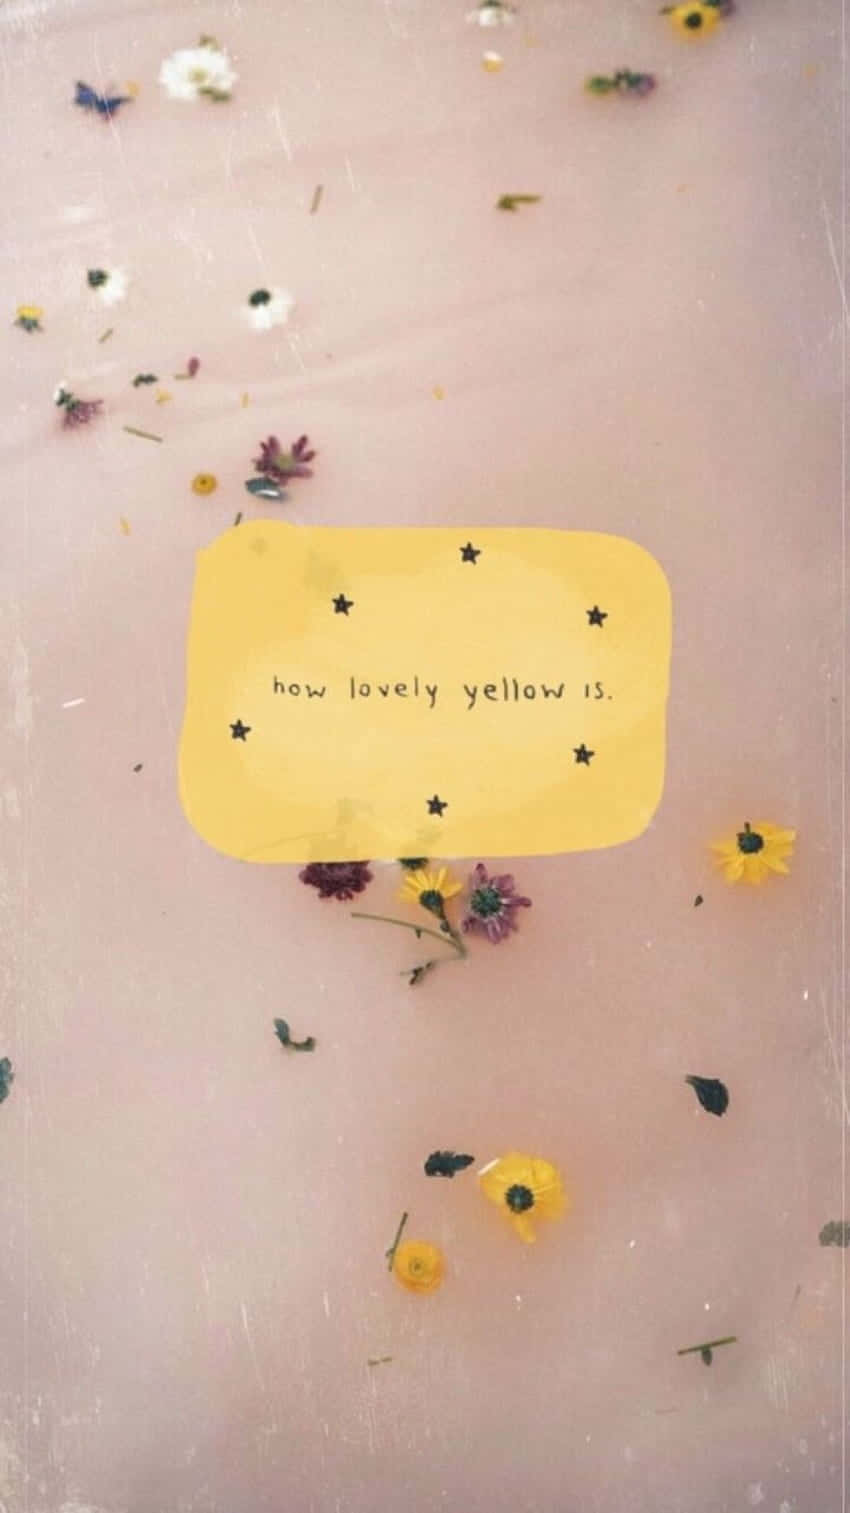 The beauty of yellow is a book about flowers - Positivity